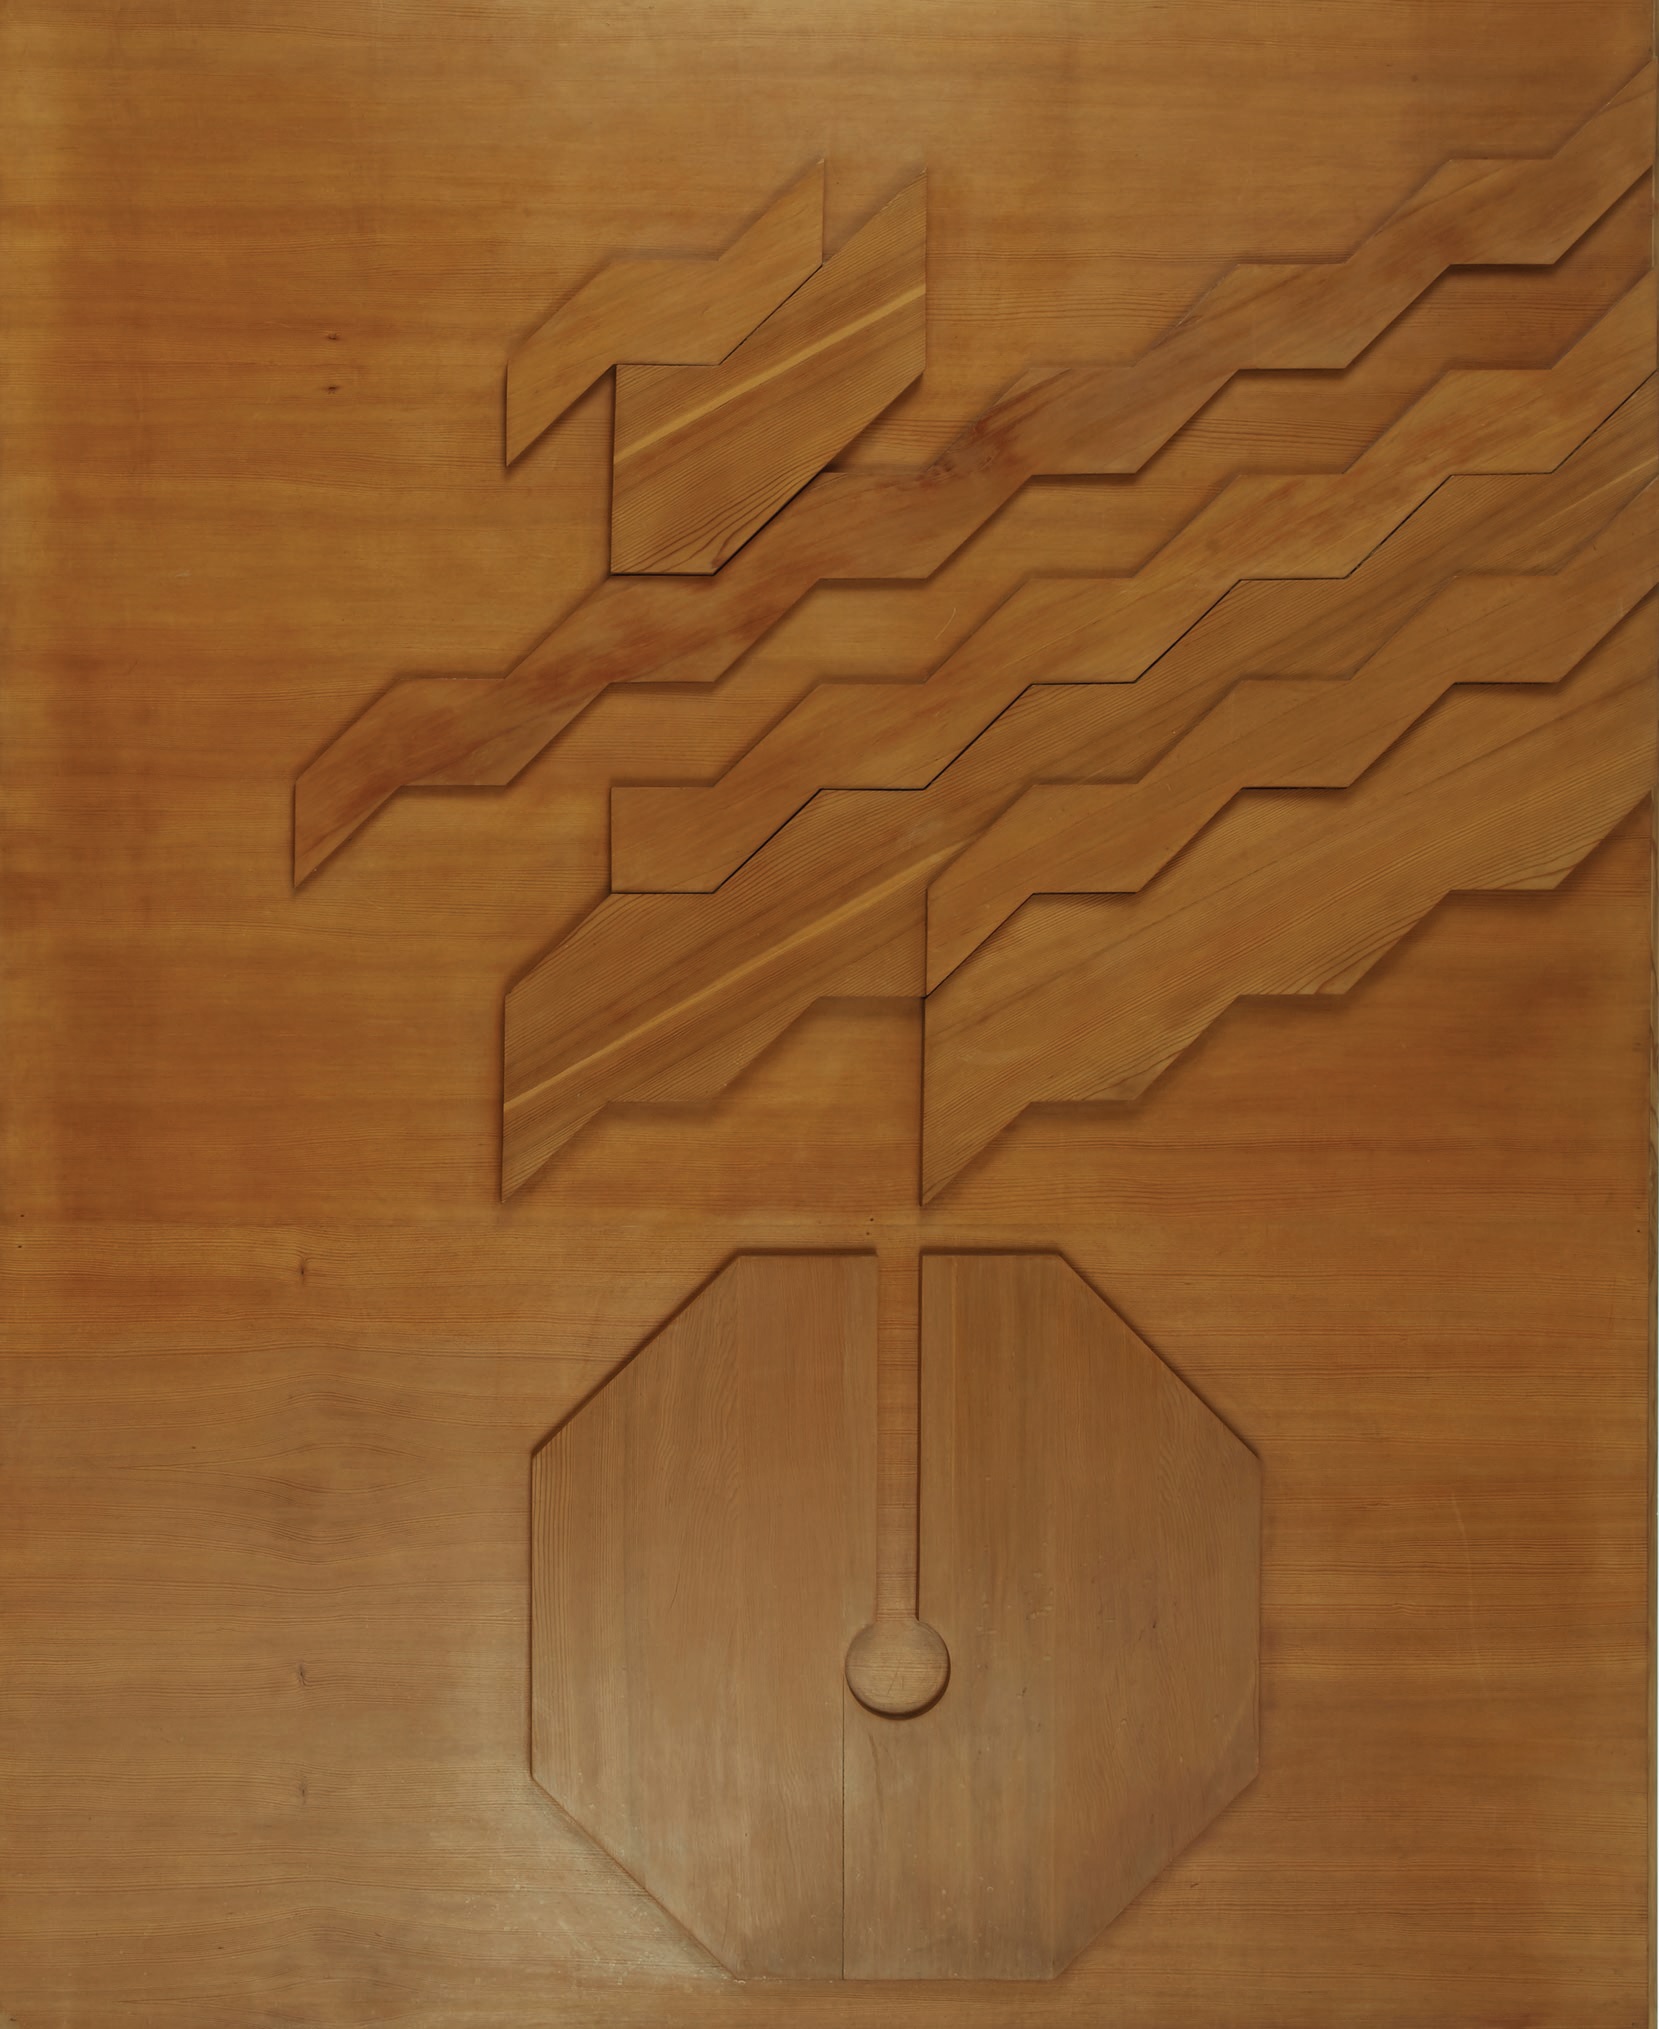 Mohamed Chebaa (Morocco), “Composition” (c. 1970, wood [bas-relief]), 98 ⅜ inches by 59 inches, collection of the Barjeel Art Foundation, Sharjah, UAE